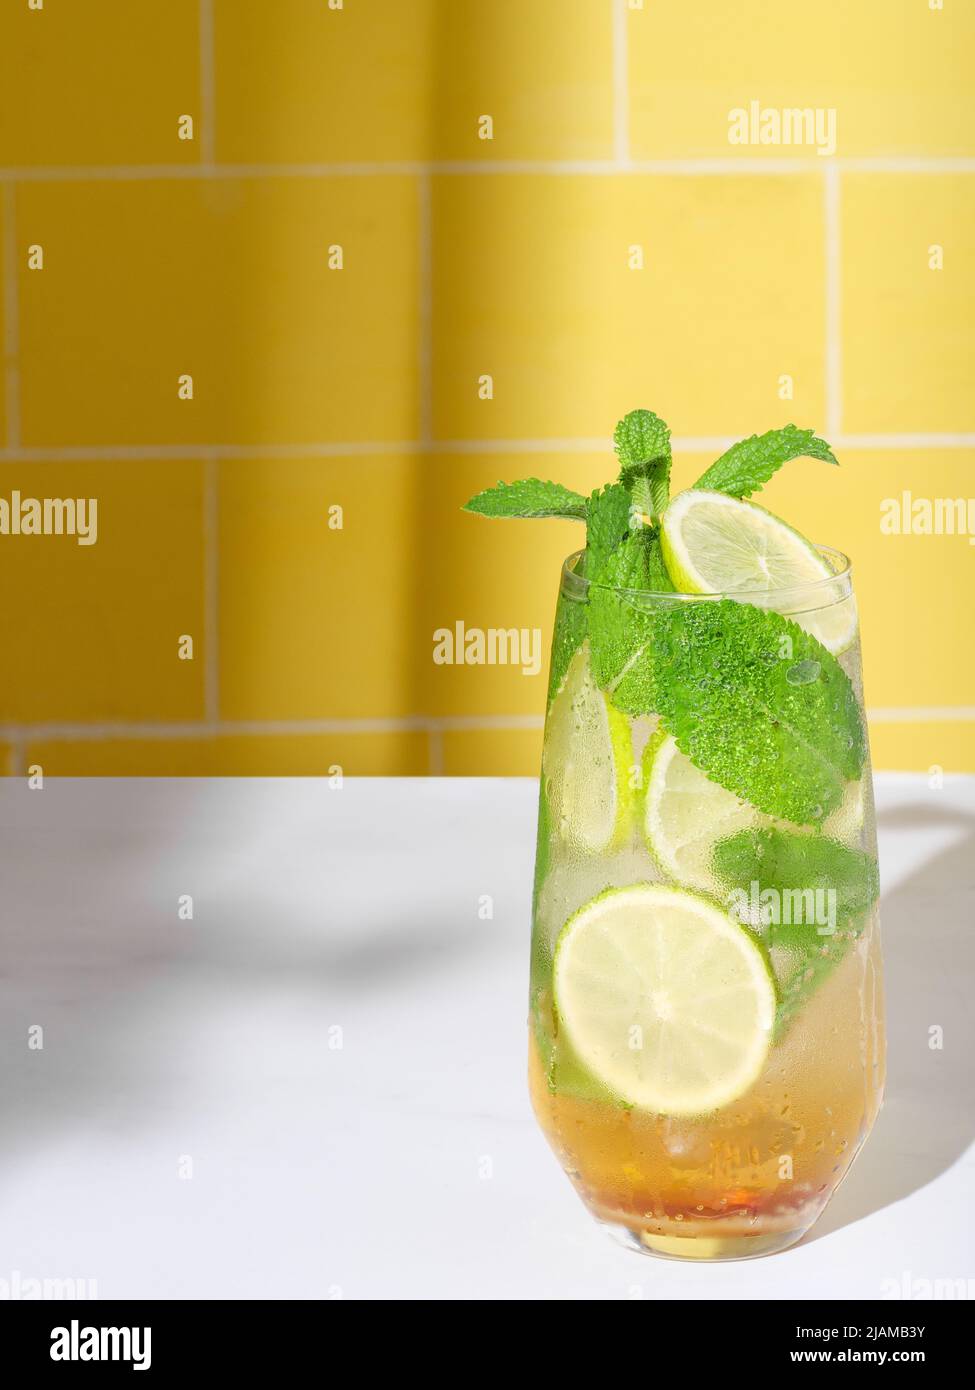 Mojito or virgin mojito long rum drink with fresh mint, lime juice, cane sugar and soda. On yellow background. Stock Photo